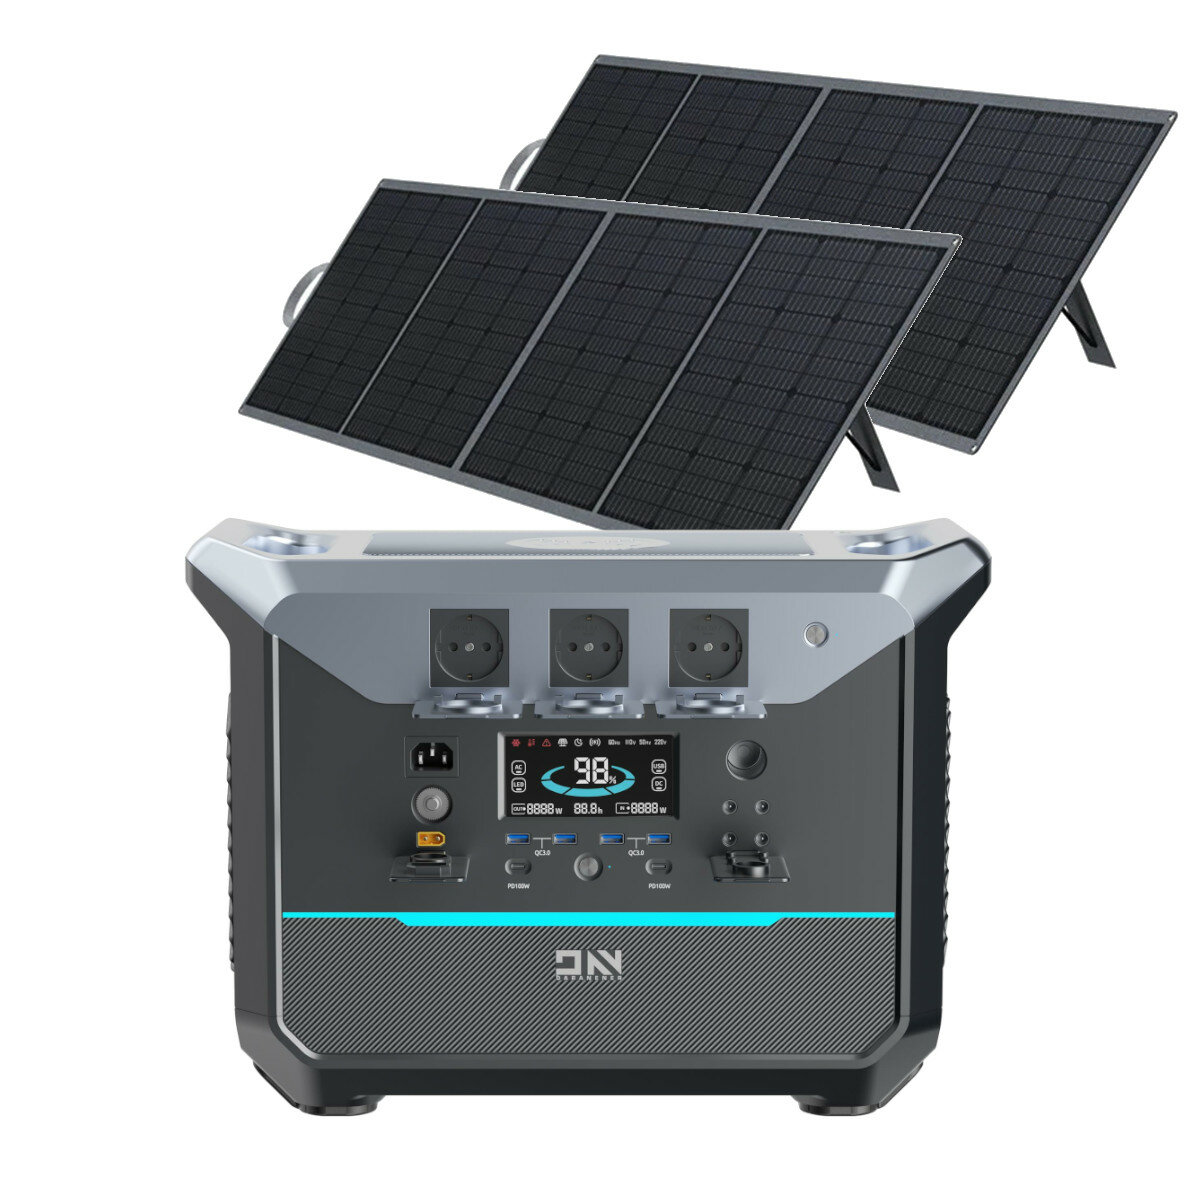 best price,daranener,neo2000,2000w,2073.6wh,lifepo4,power,station,with,2pc,sp200,discount